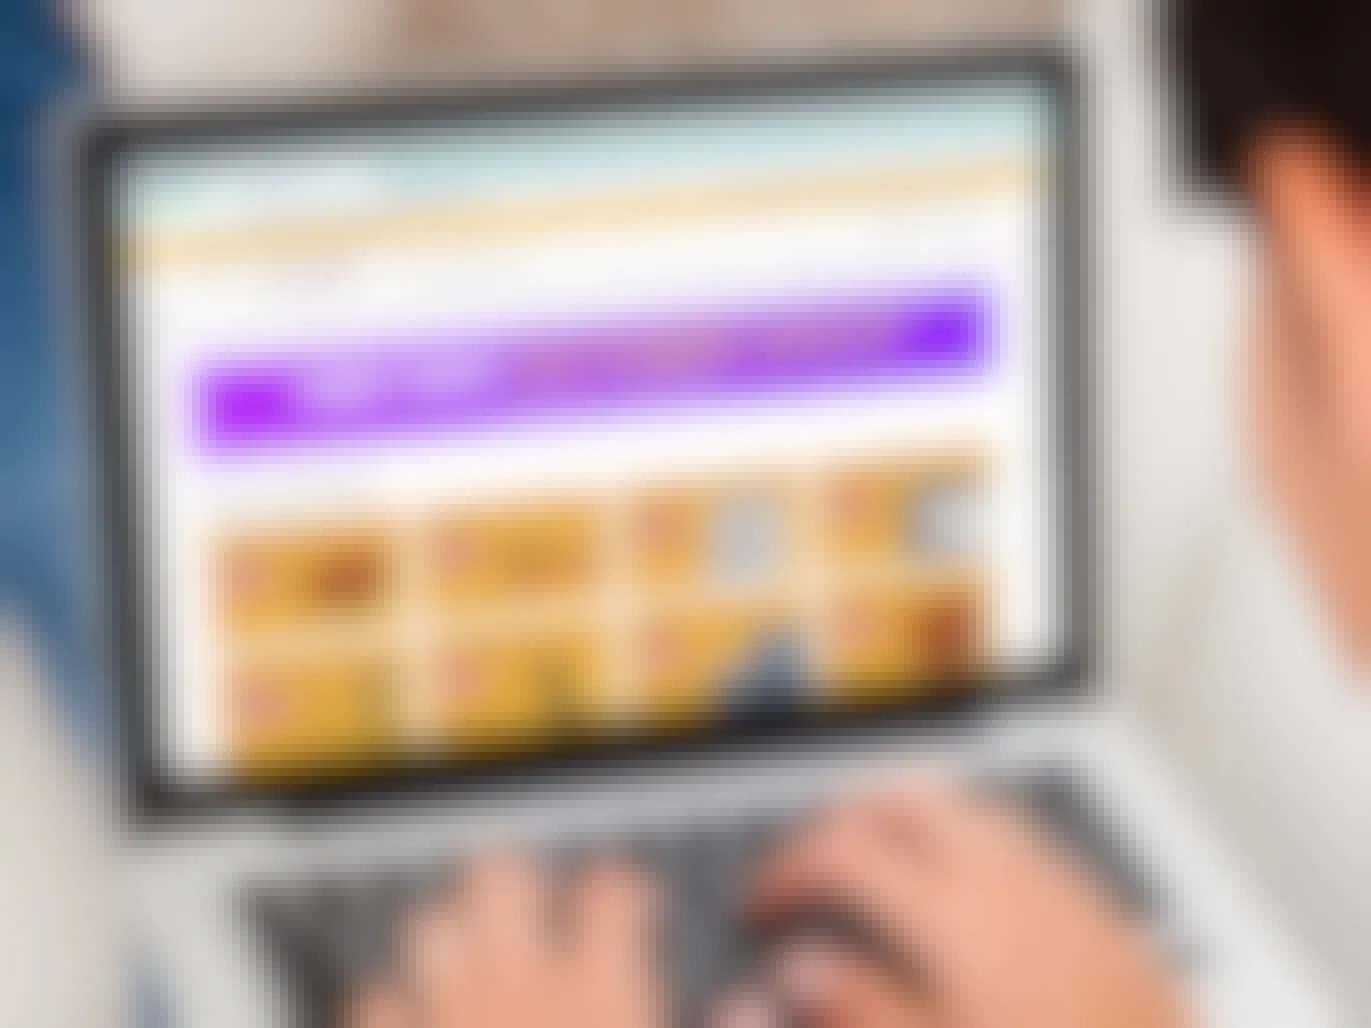 person on laptop looking at wayfair websites way day promotions